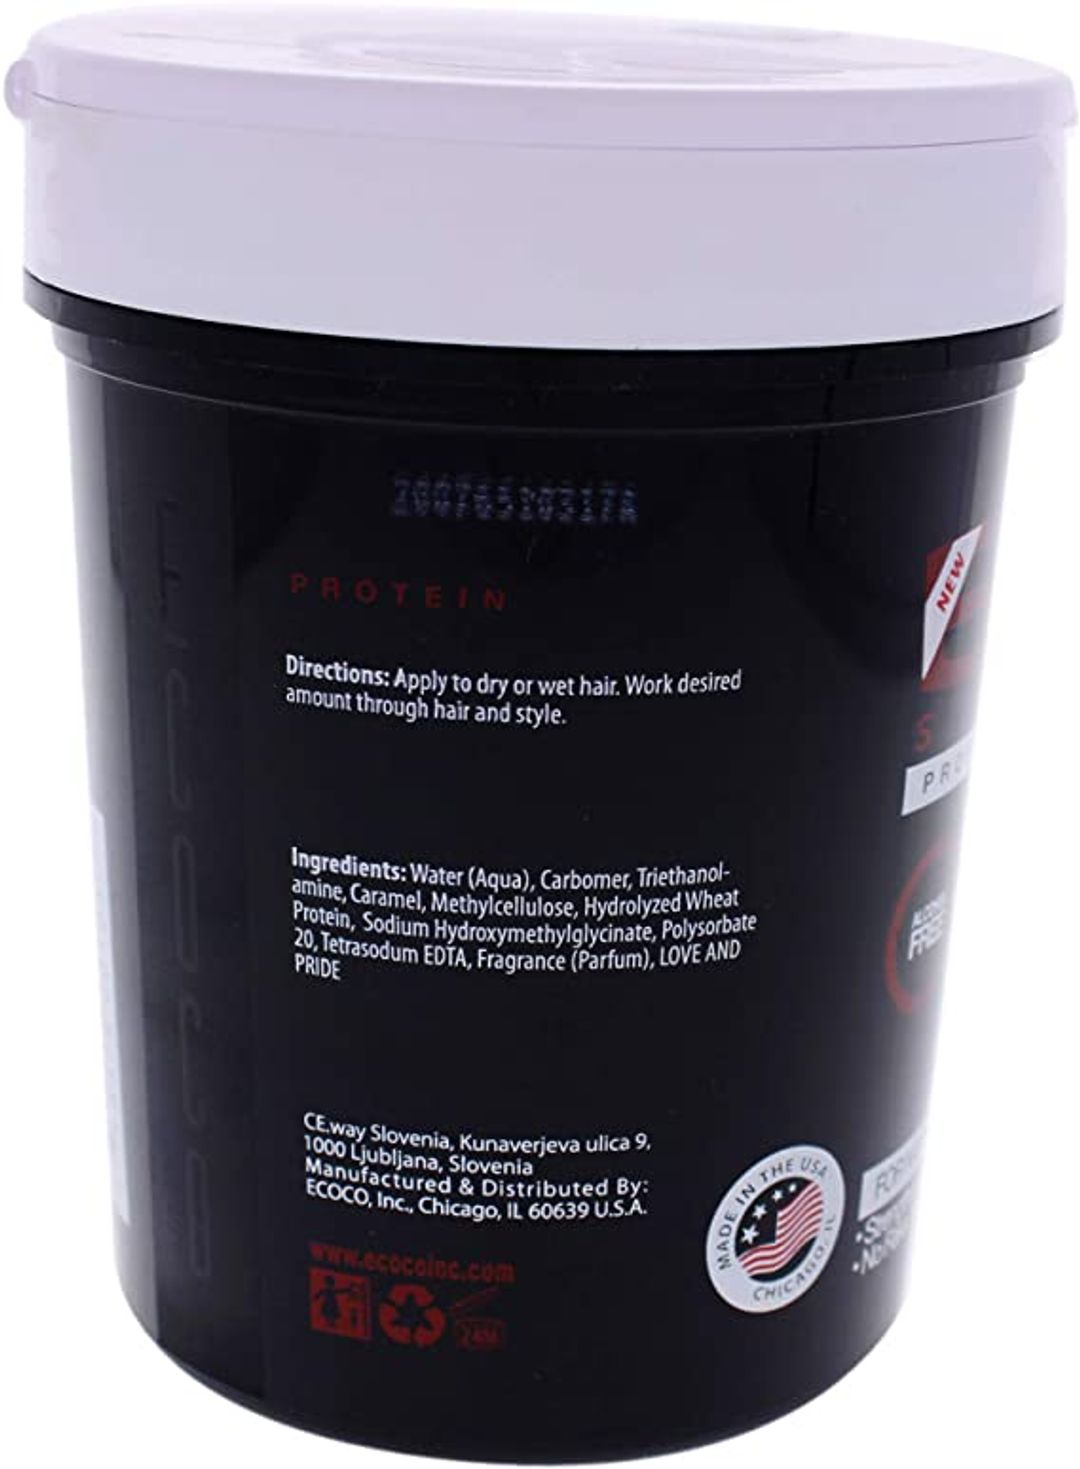 Eco Styler Professional Styling Gel Protein - 32oz